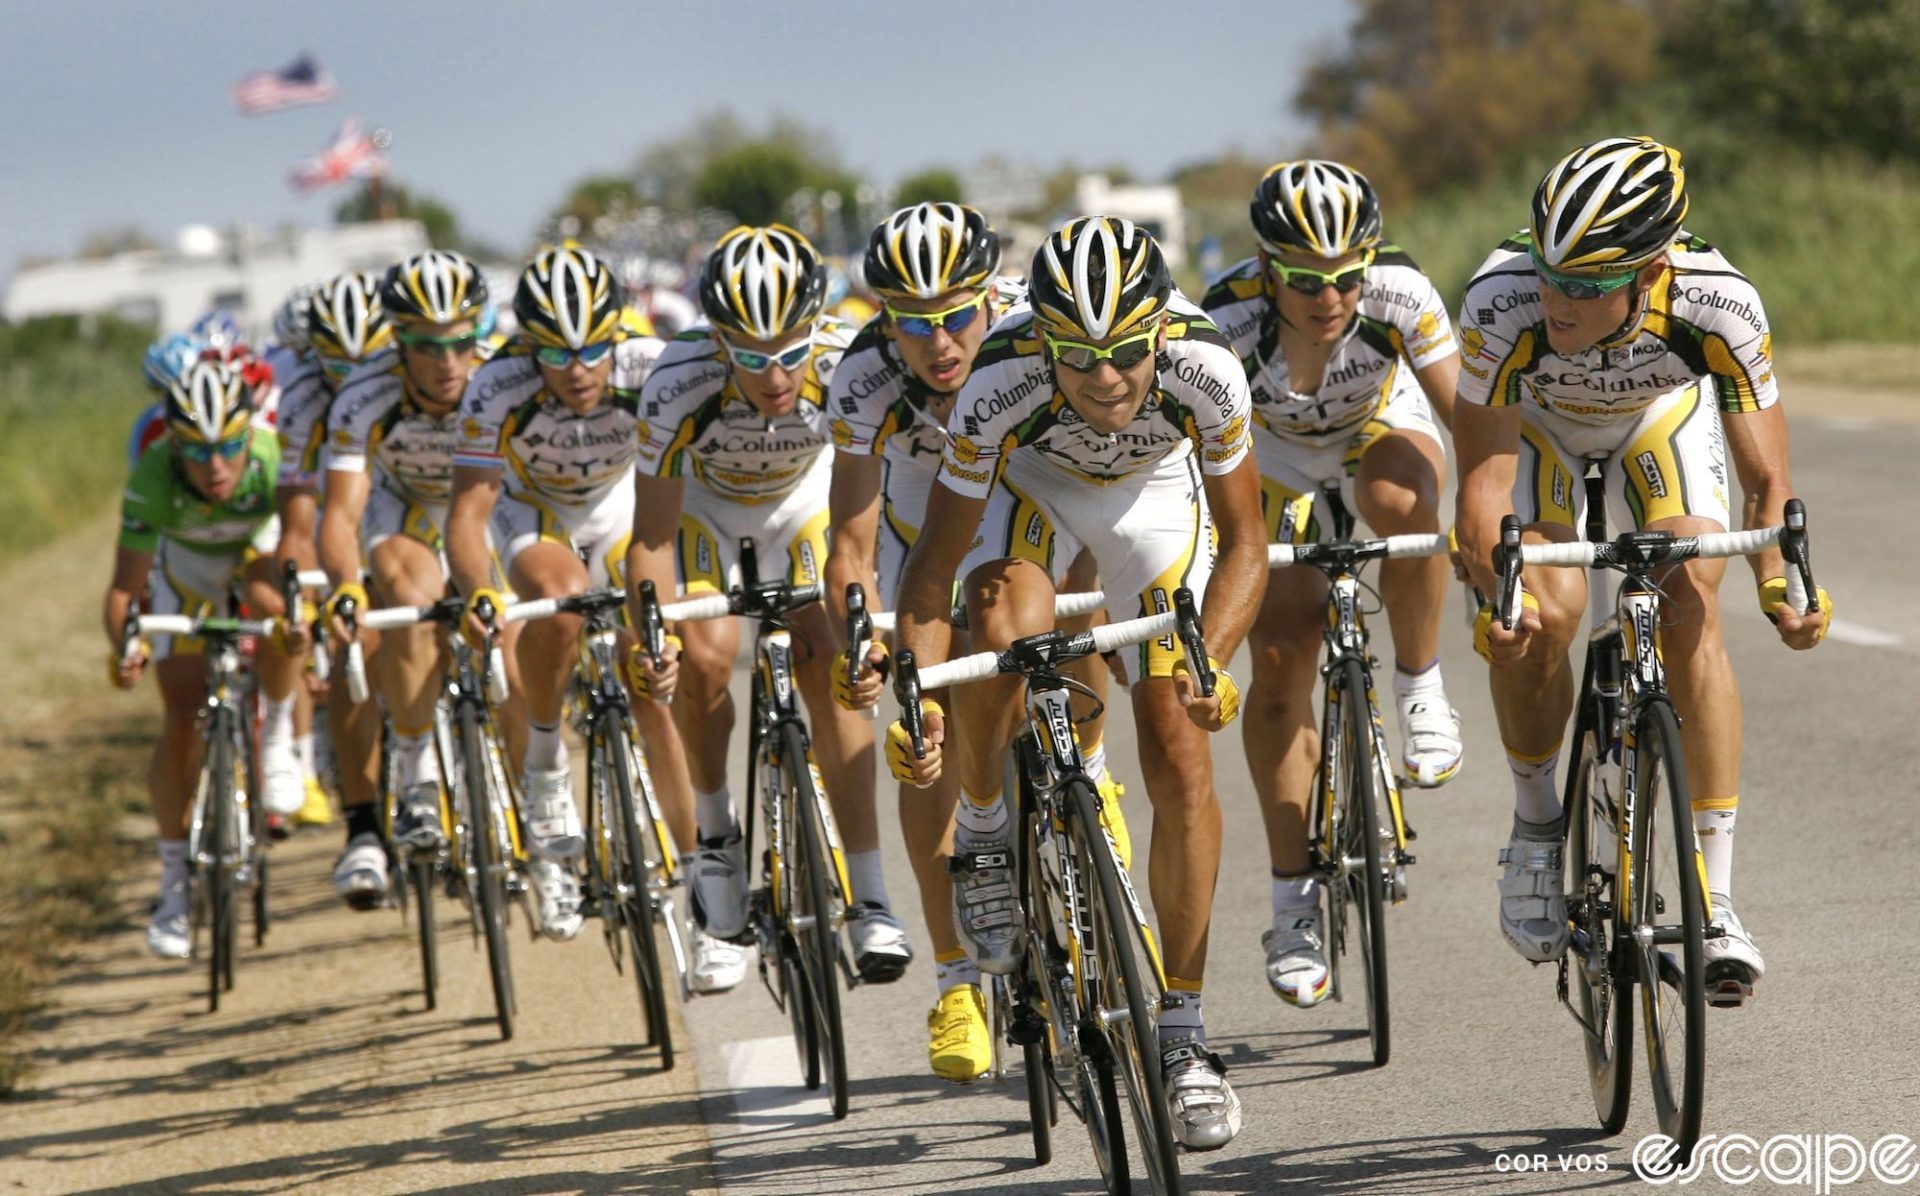 The entire HTC-Columbia team rides on the front of a race. Eight riders all in the distinctive white, yellow, and black kit ride in a double paceline. They're slammed over in the gutter and at the back a green-jersey clad Mark Cavendish rides in the dirt on the side of the road.